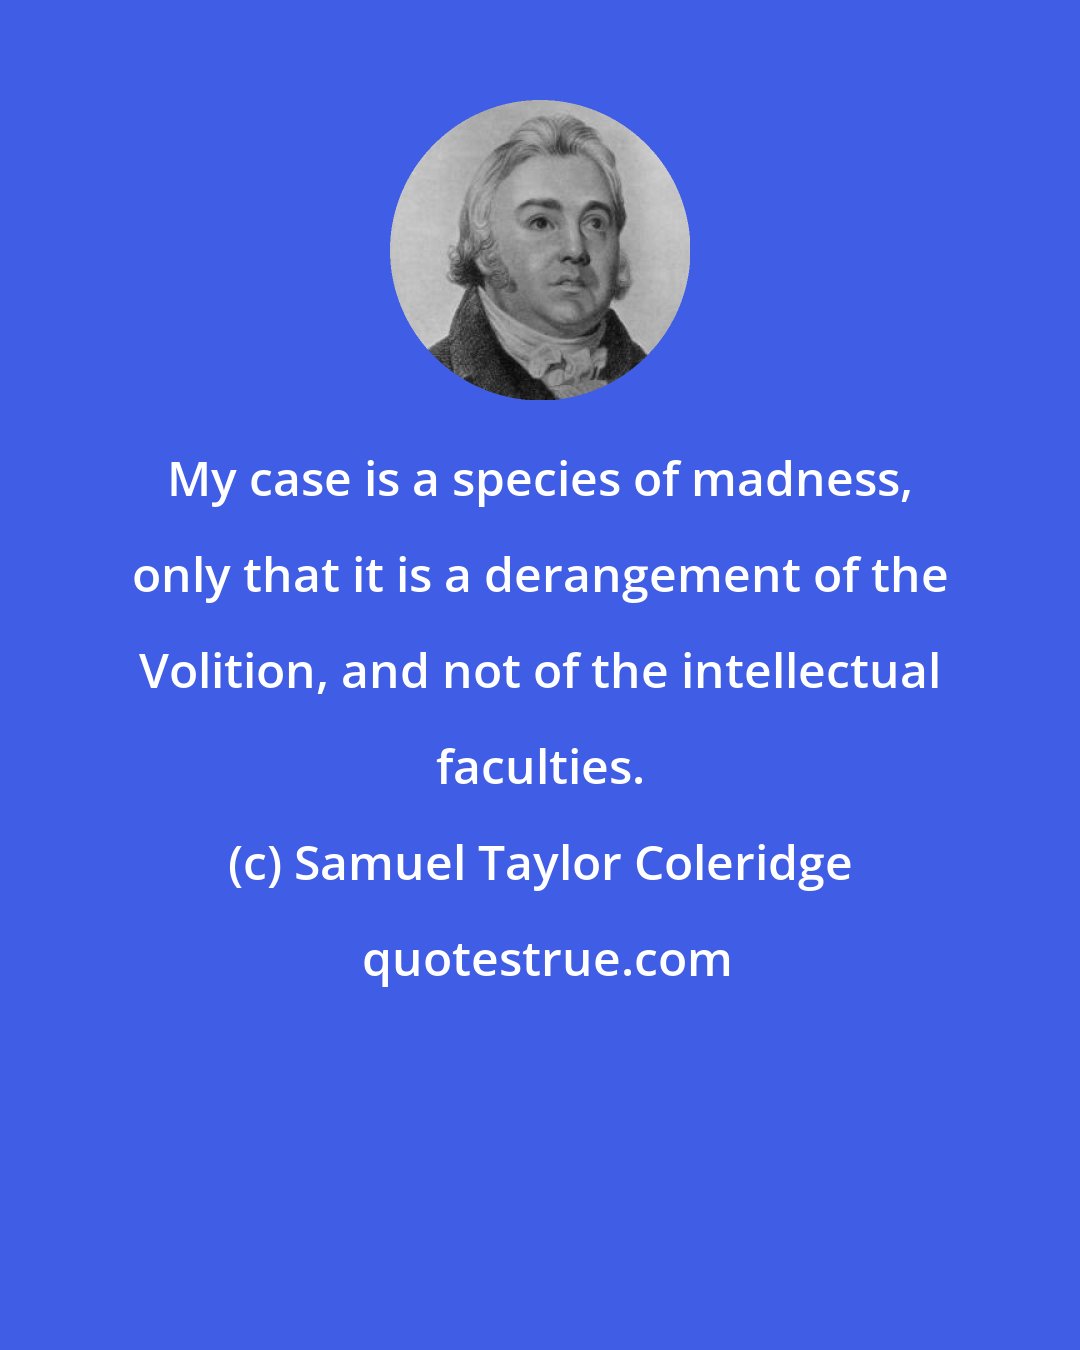 Samuel Taylor Coleridge: My case is a species of madness, only that it is a derangement of the Volition, and not of the intellectual faculties.